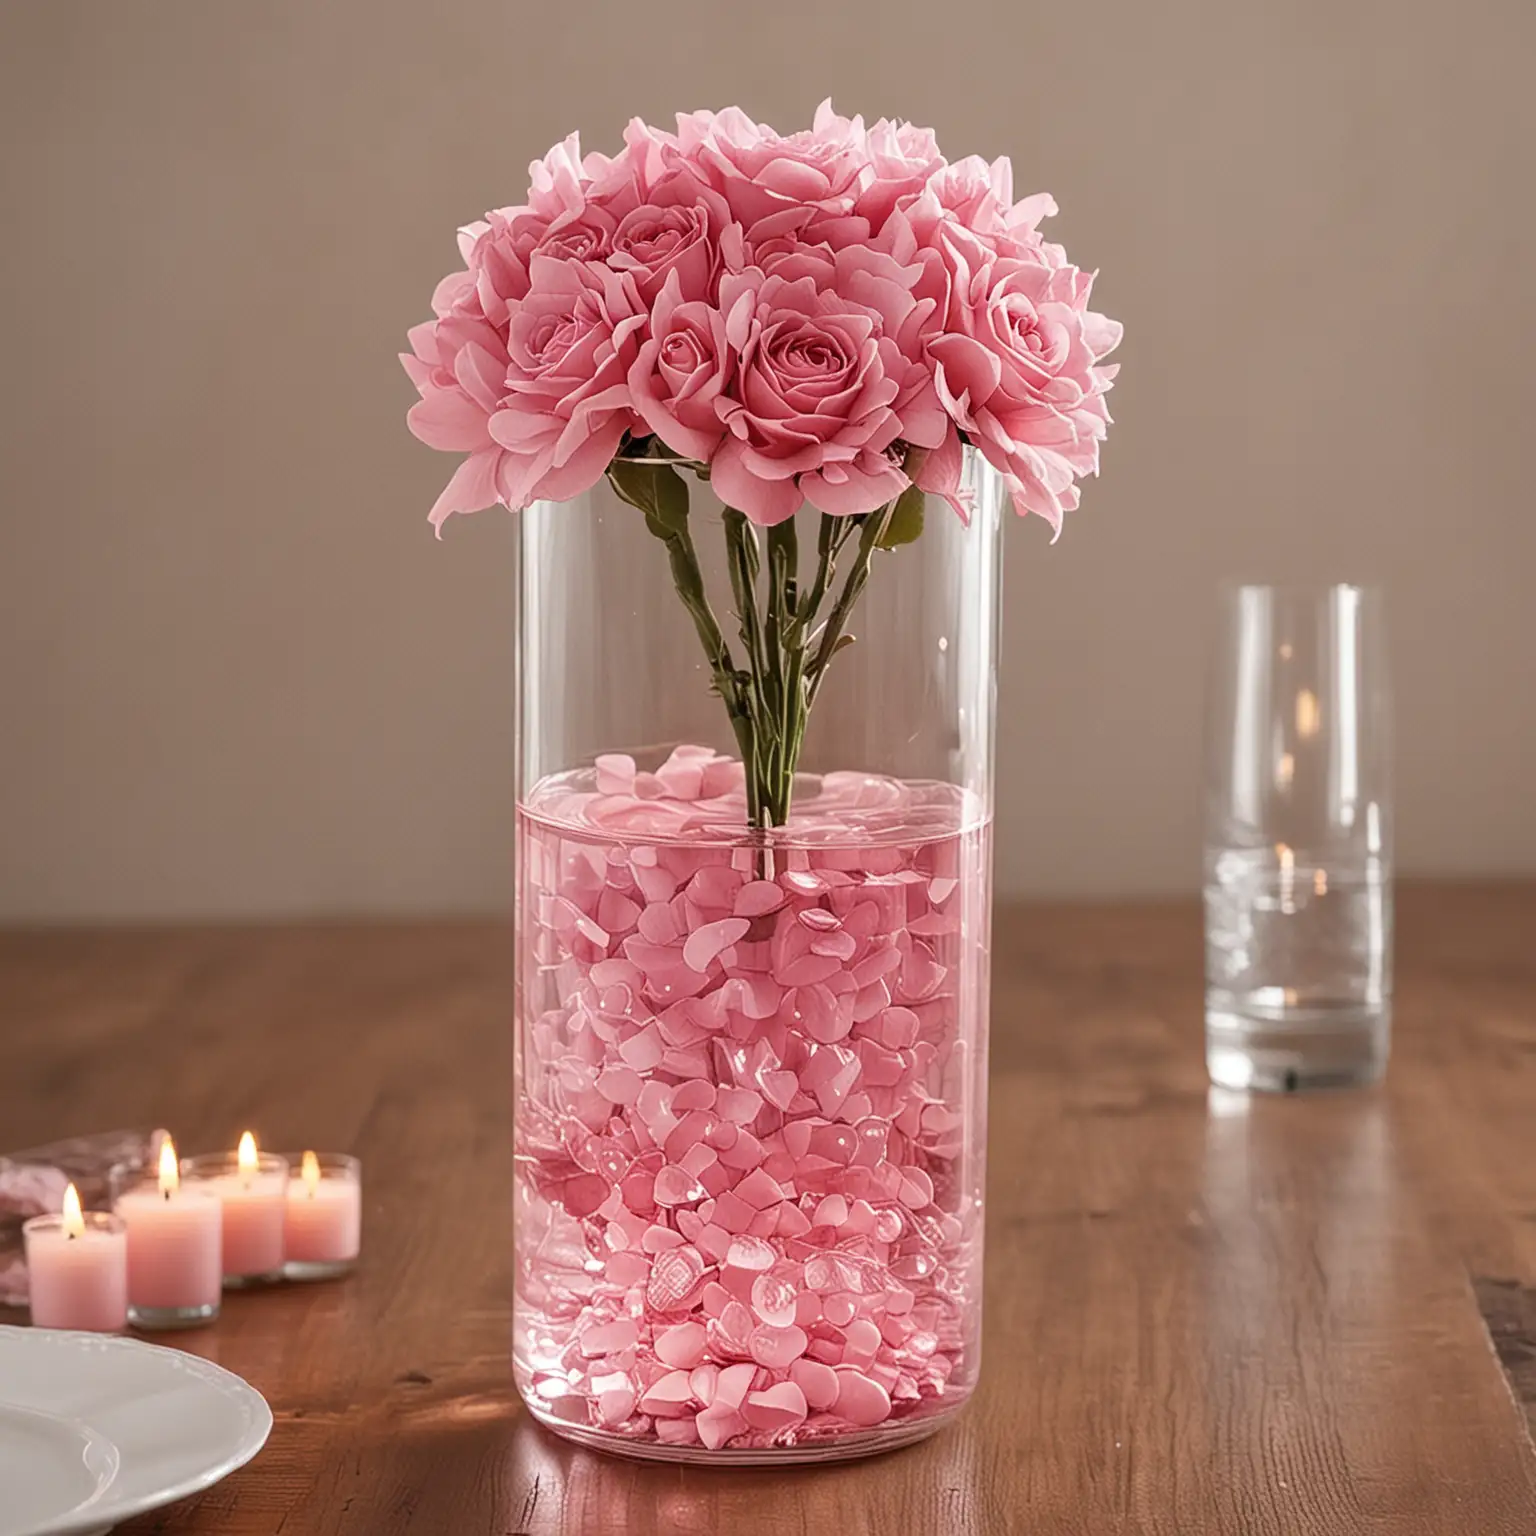 DIY-Wedding-Centerpiece-with-Pink-Colored-Water-in-Glass-Cylinder-Vase